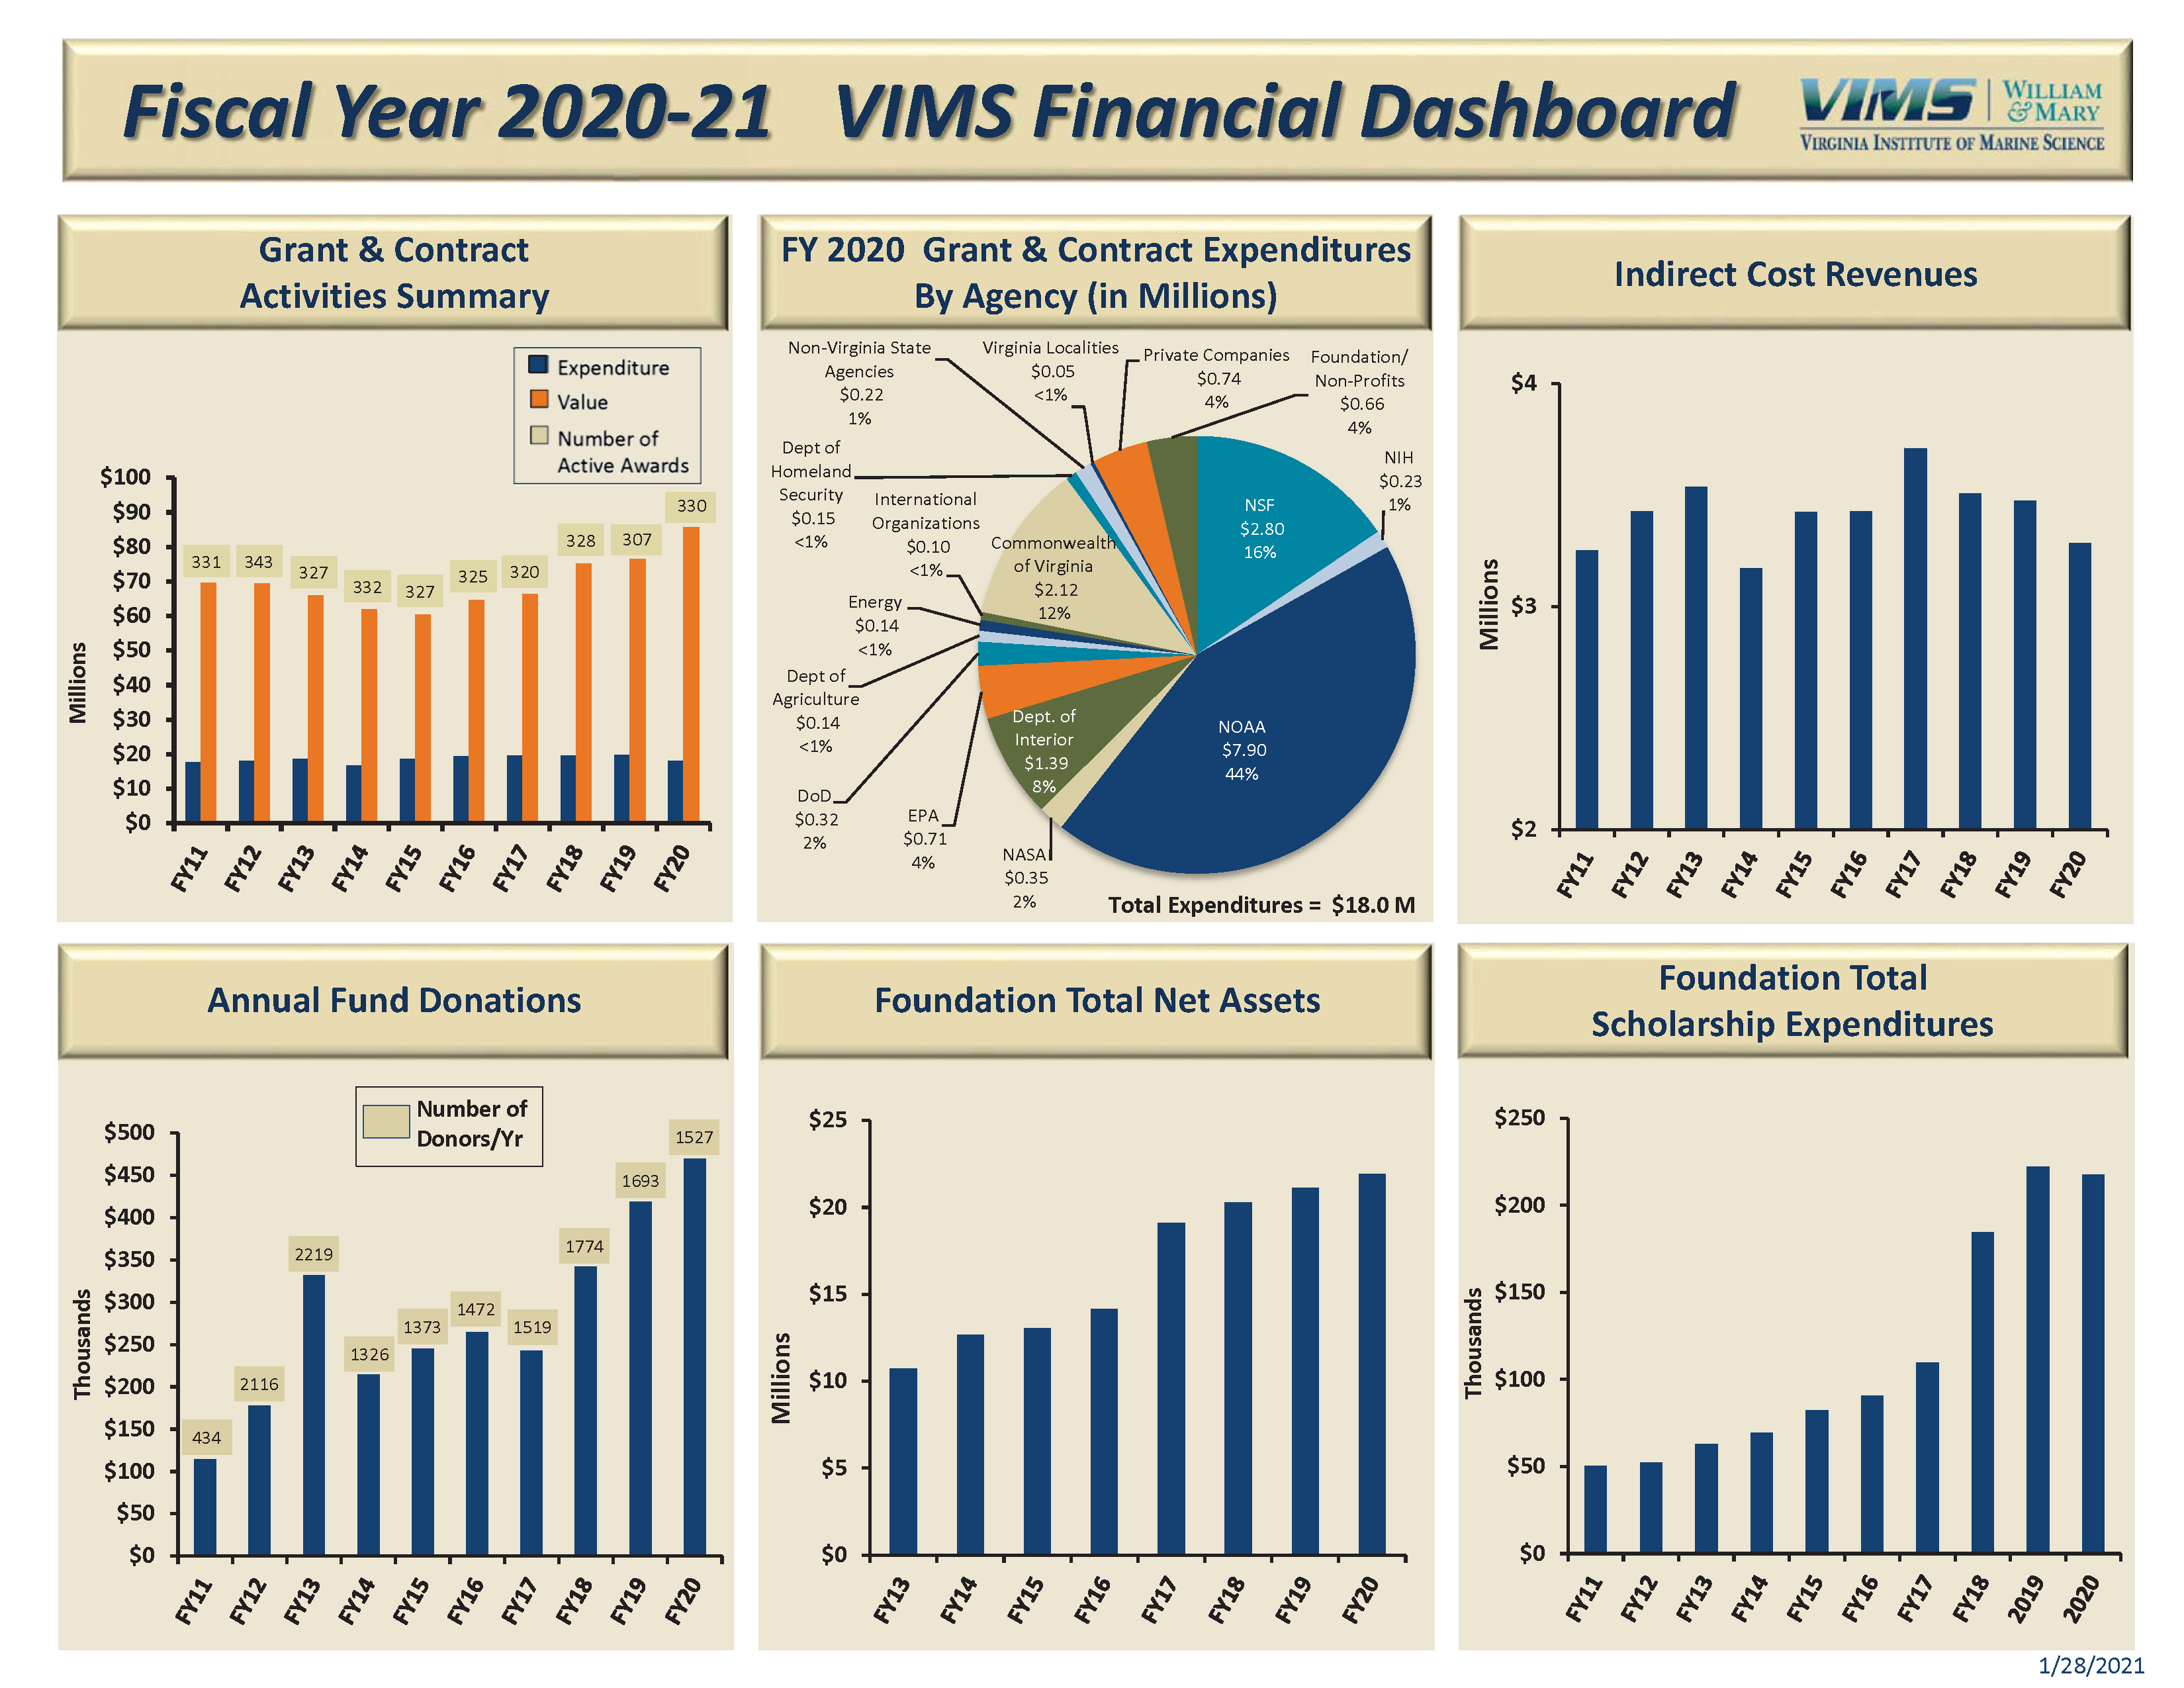 vims_financial_dashboard_fy21_final_page_1-2.jpg